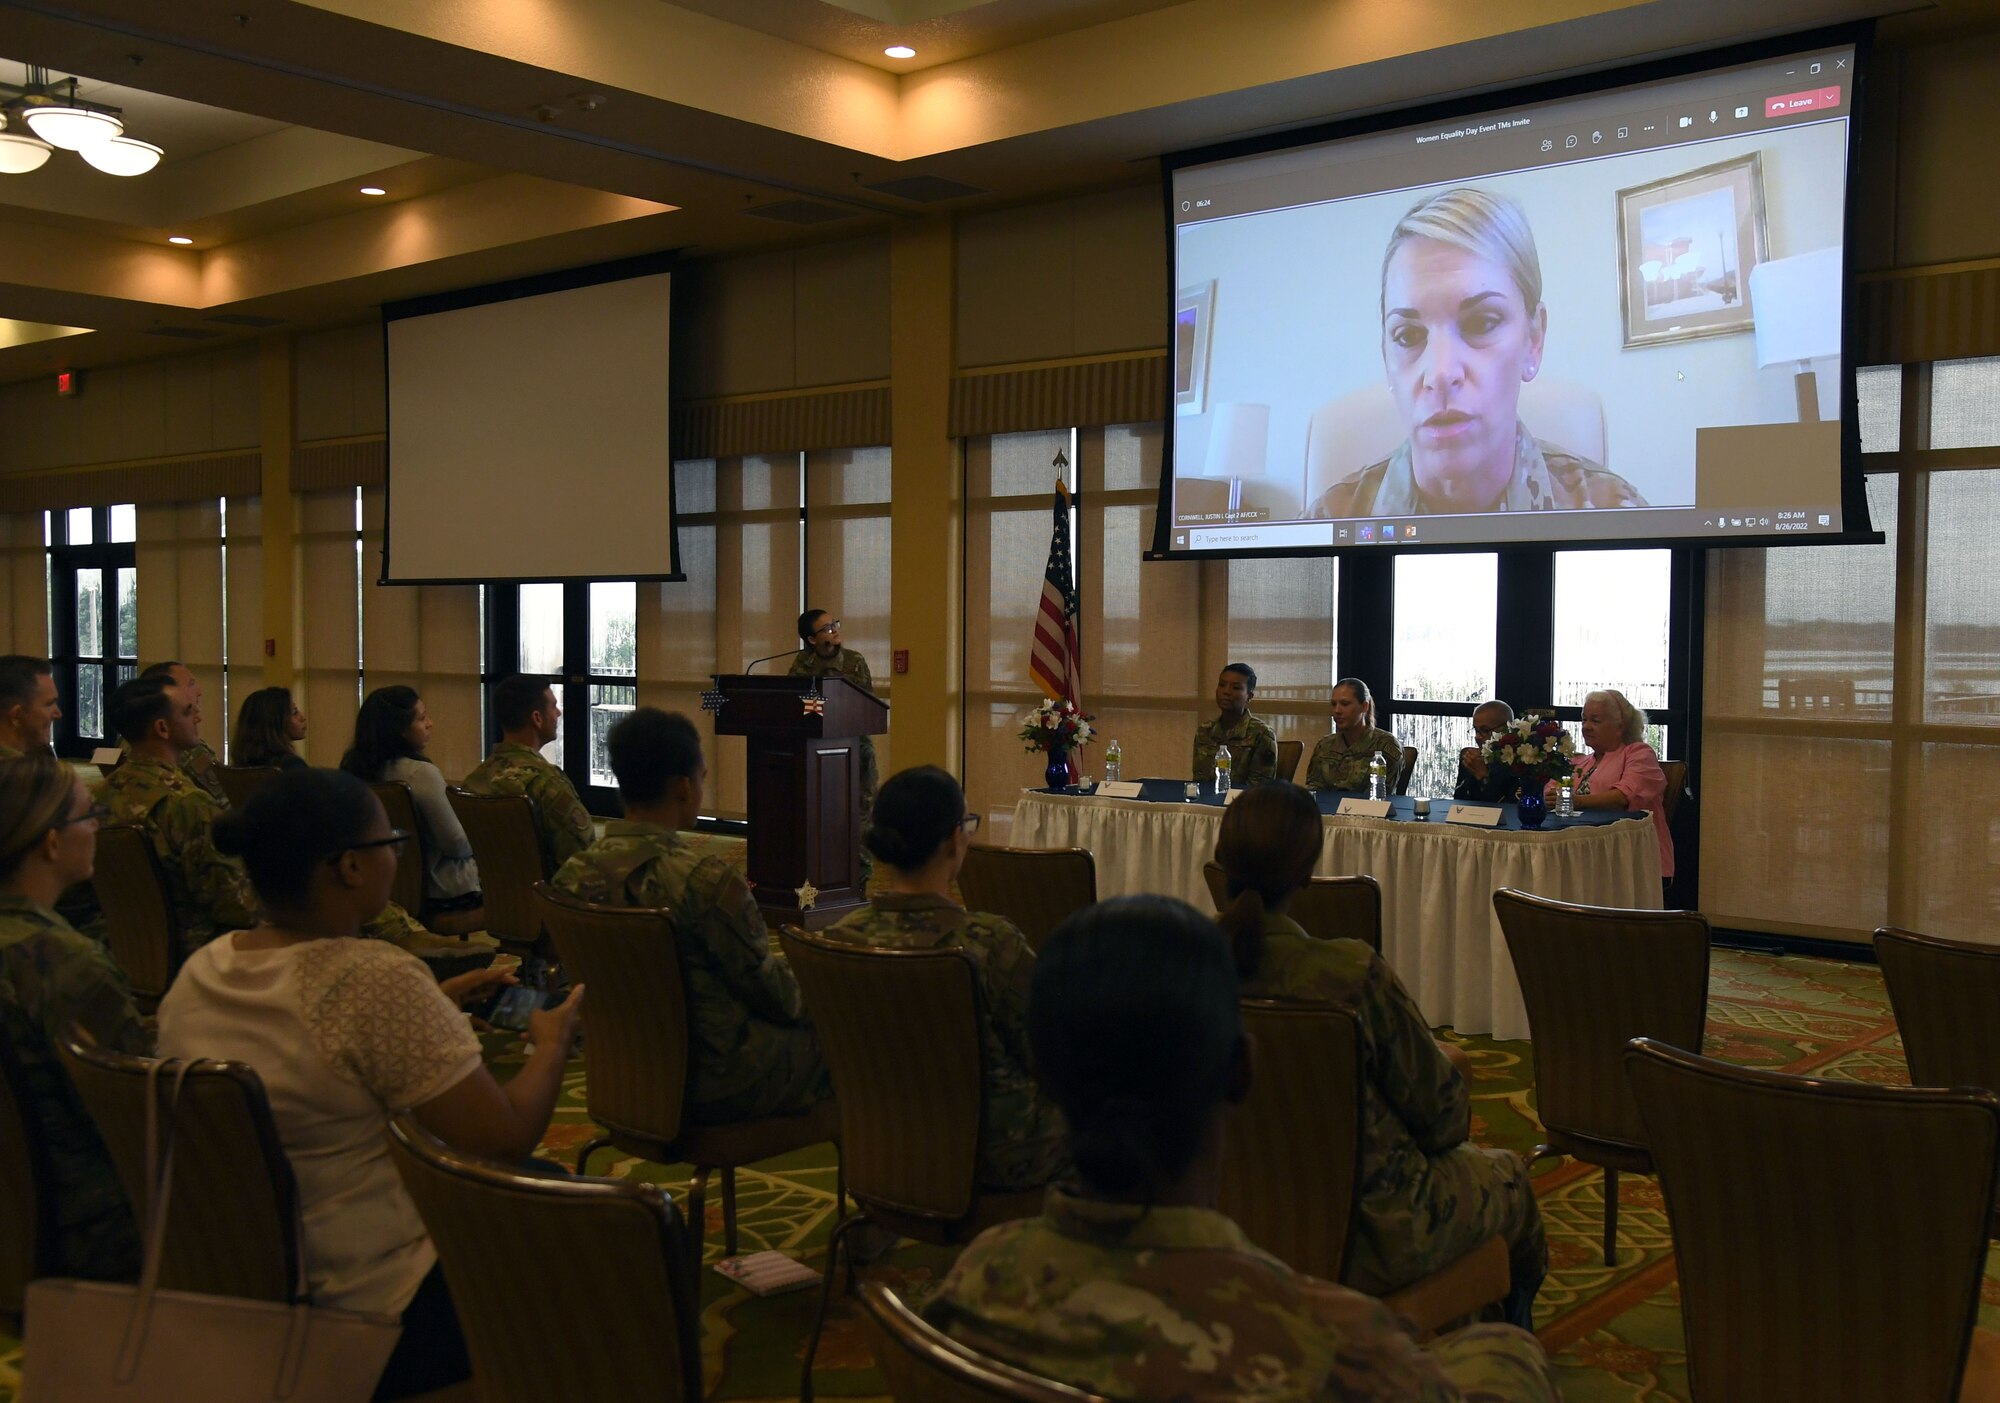 U.S. Air Force Maj. Gen. Michele Edmondson, Second Air Force commander, delivers remarks during the Women's Equality Day event inside the Bay Breeze Event Center at Keesler Air Force Base, Mississippi, Aug. 26, 2022. On Women's Equality Day, we honor the movement for universal suffrage that led to the 19th Amendment, celebrate the progress of women over the years, and renew our commitment to advancing gender equity and protecting women's rights. (U.S. Air Force photo by Kemberly Groue)